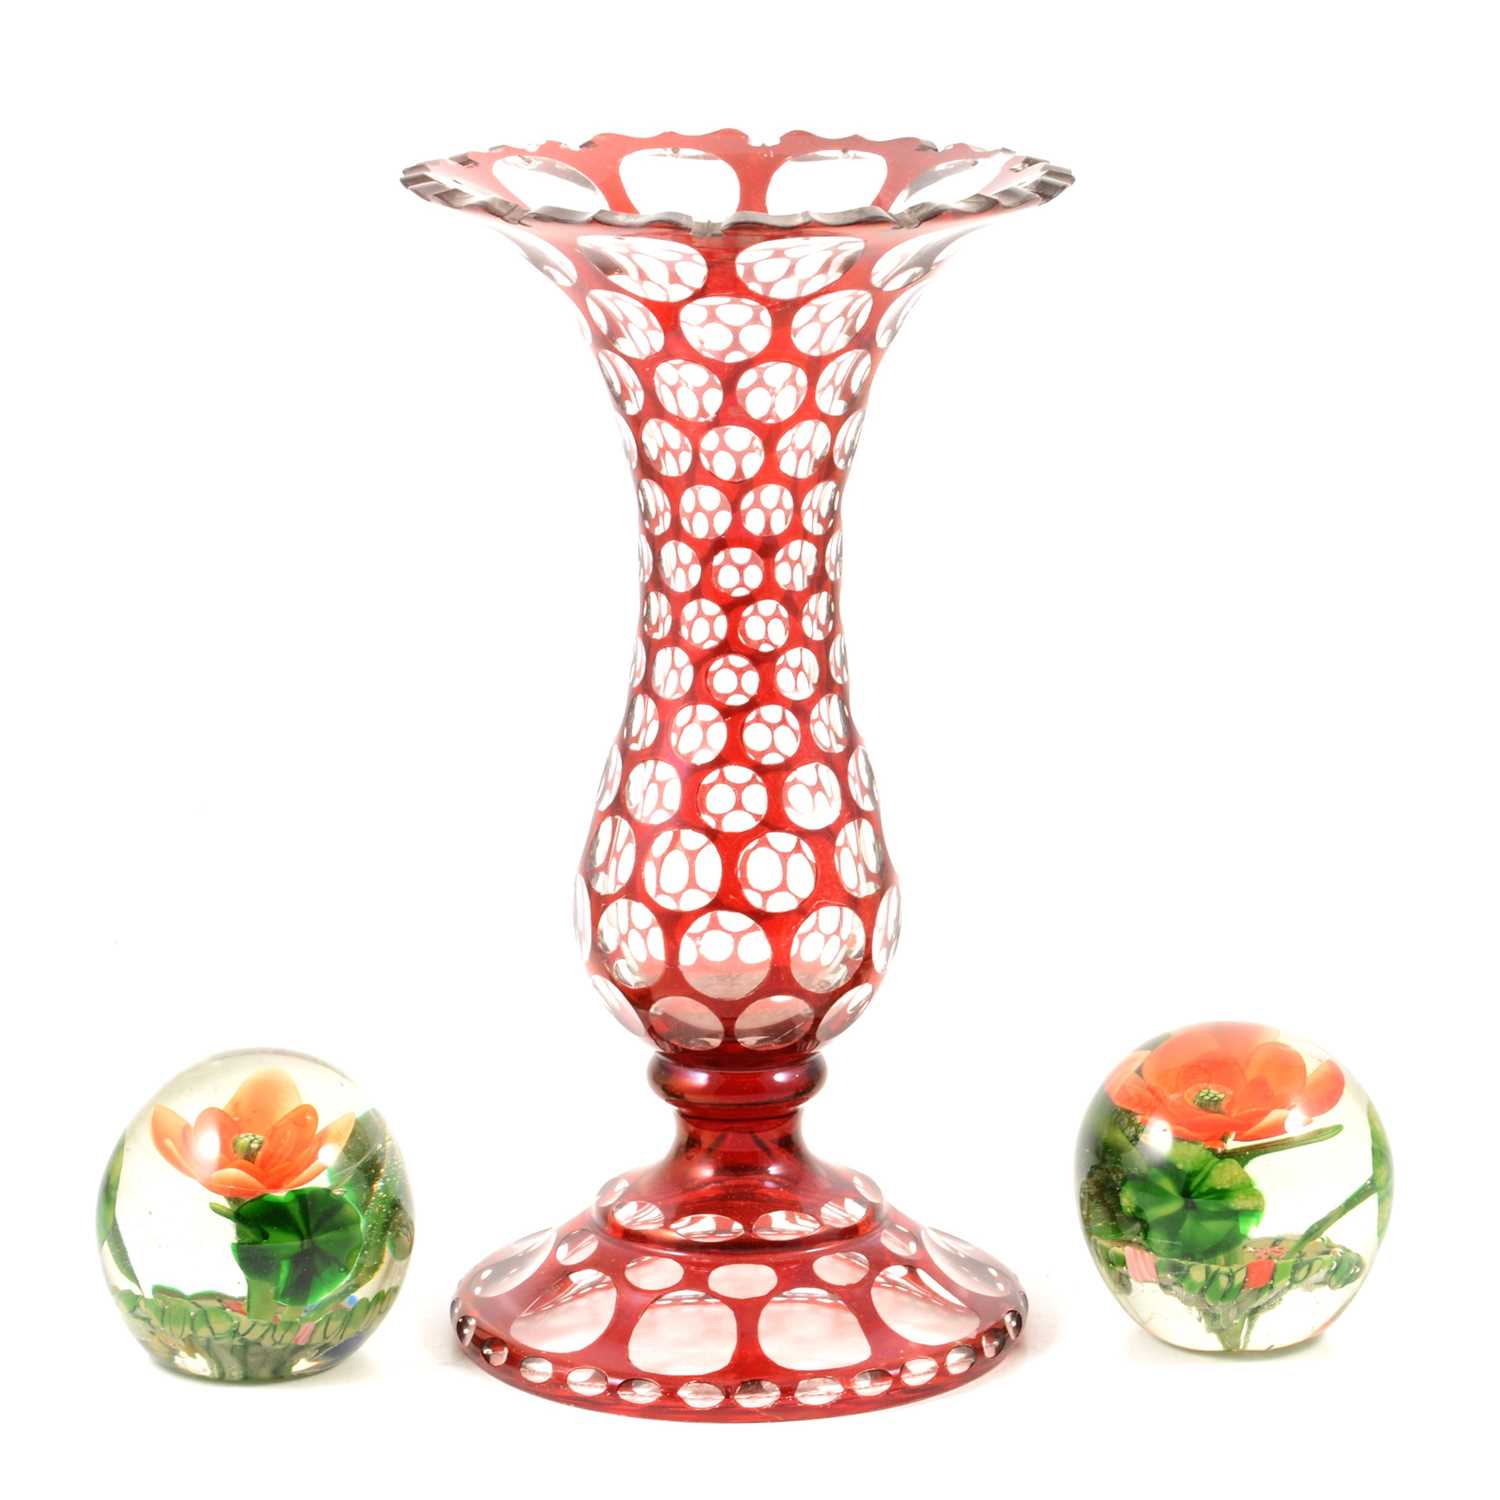 Lot 46 - Pair of floral glass paperweights, and a glass vase.